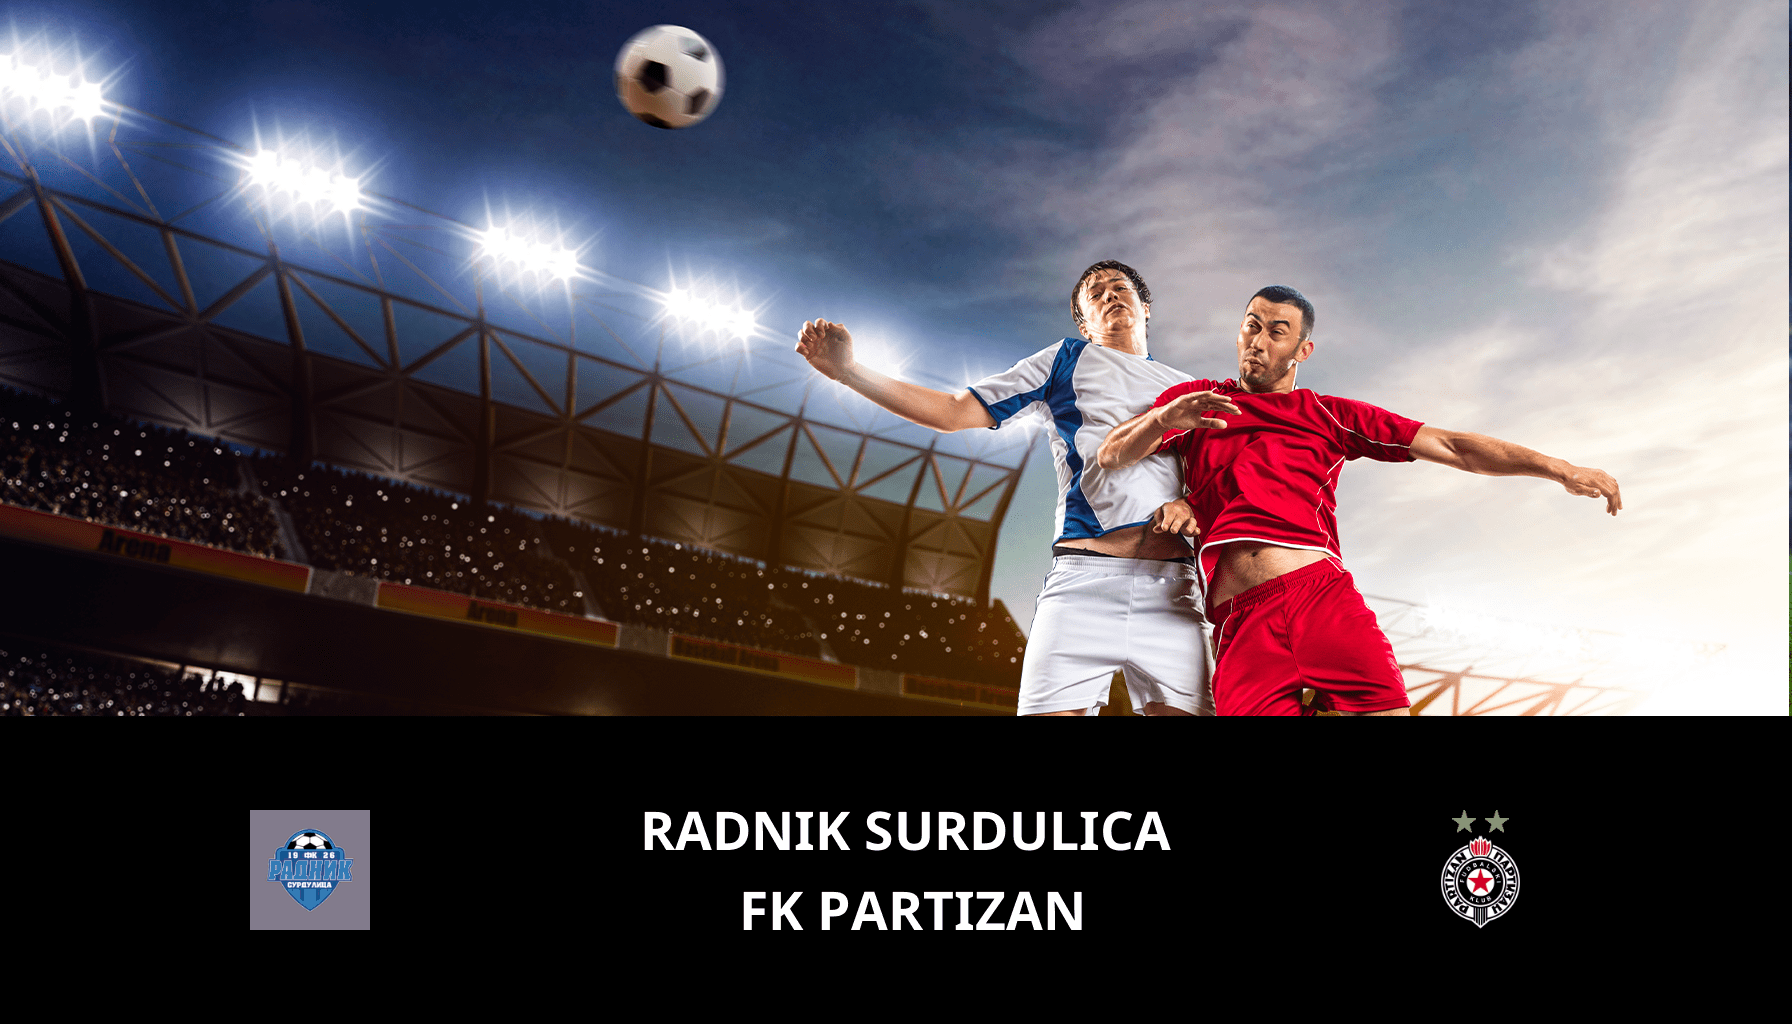 Prediction for Radnik Surdulica VS FK Partizan on 24/02/2024 Analysis of the match